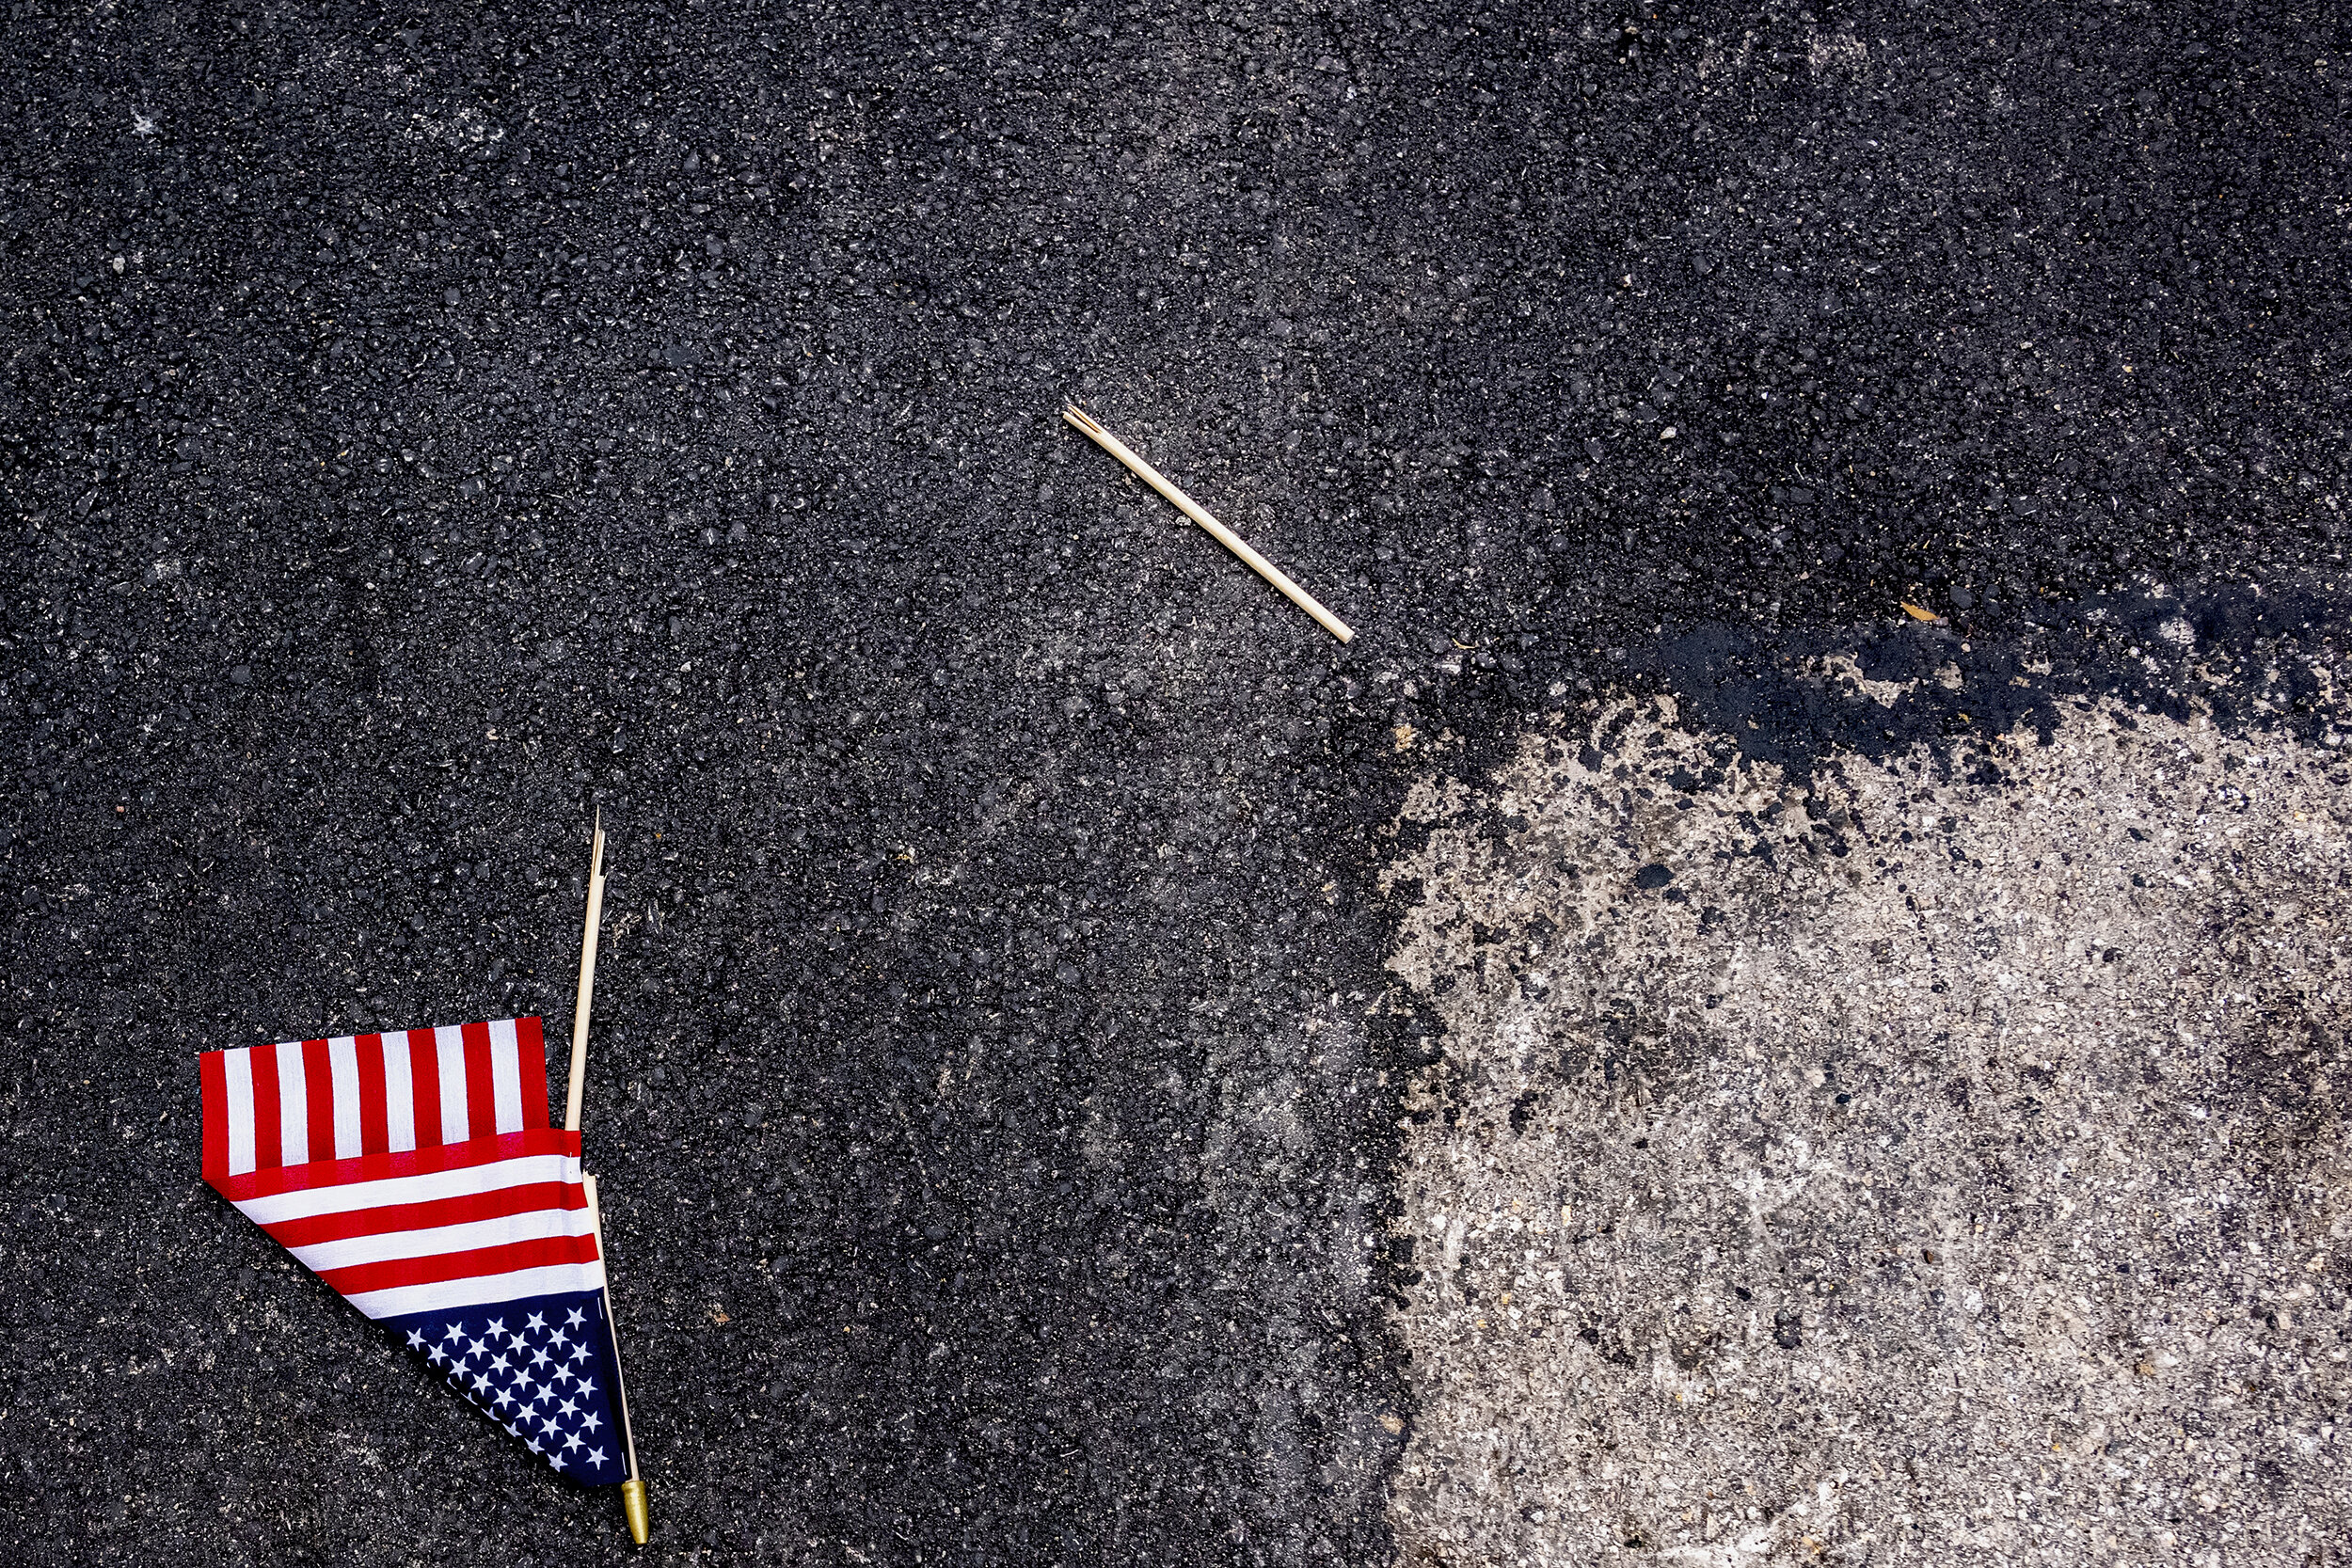  A broken American flag lies on the street in downtown Dallas, TX on June 28, 2020.  Parishioners attending a service with Vice President Pence at First Baptist Church filed out with small American flags. At least one was soon discarded. 